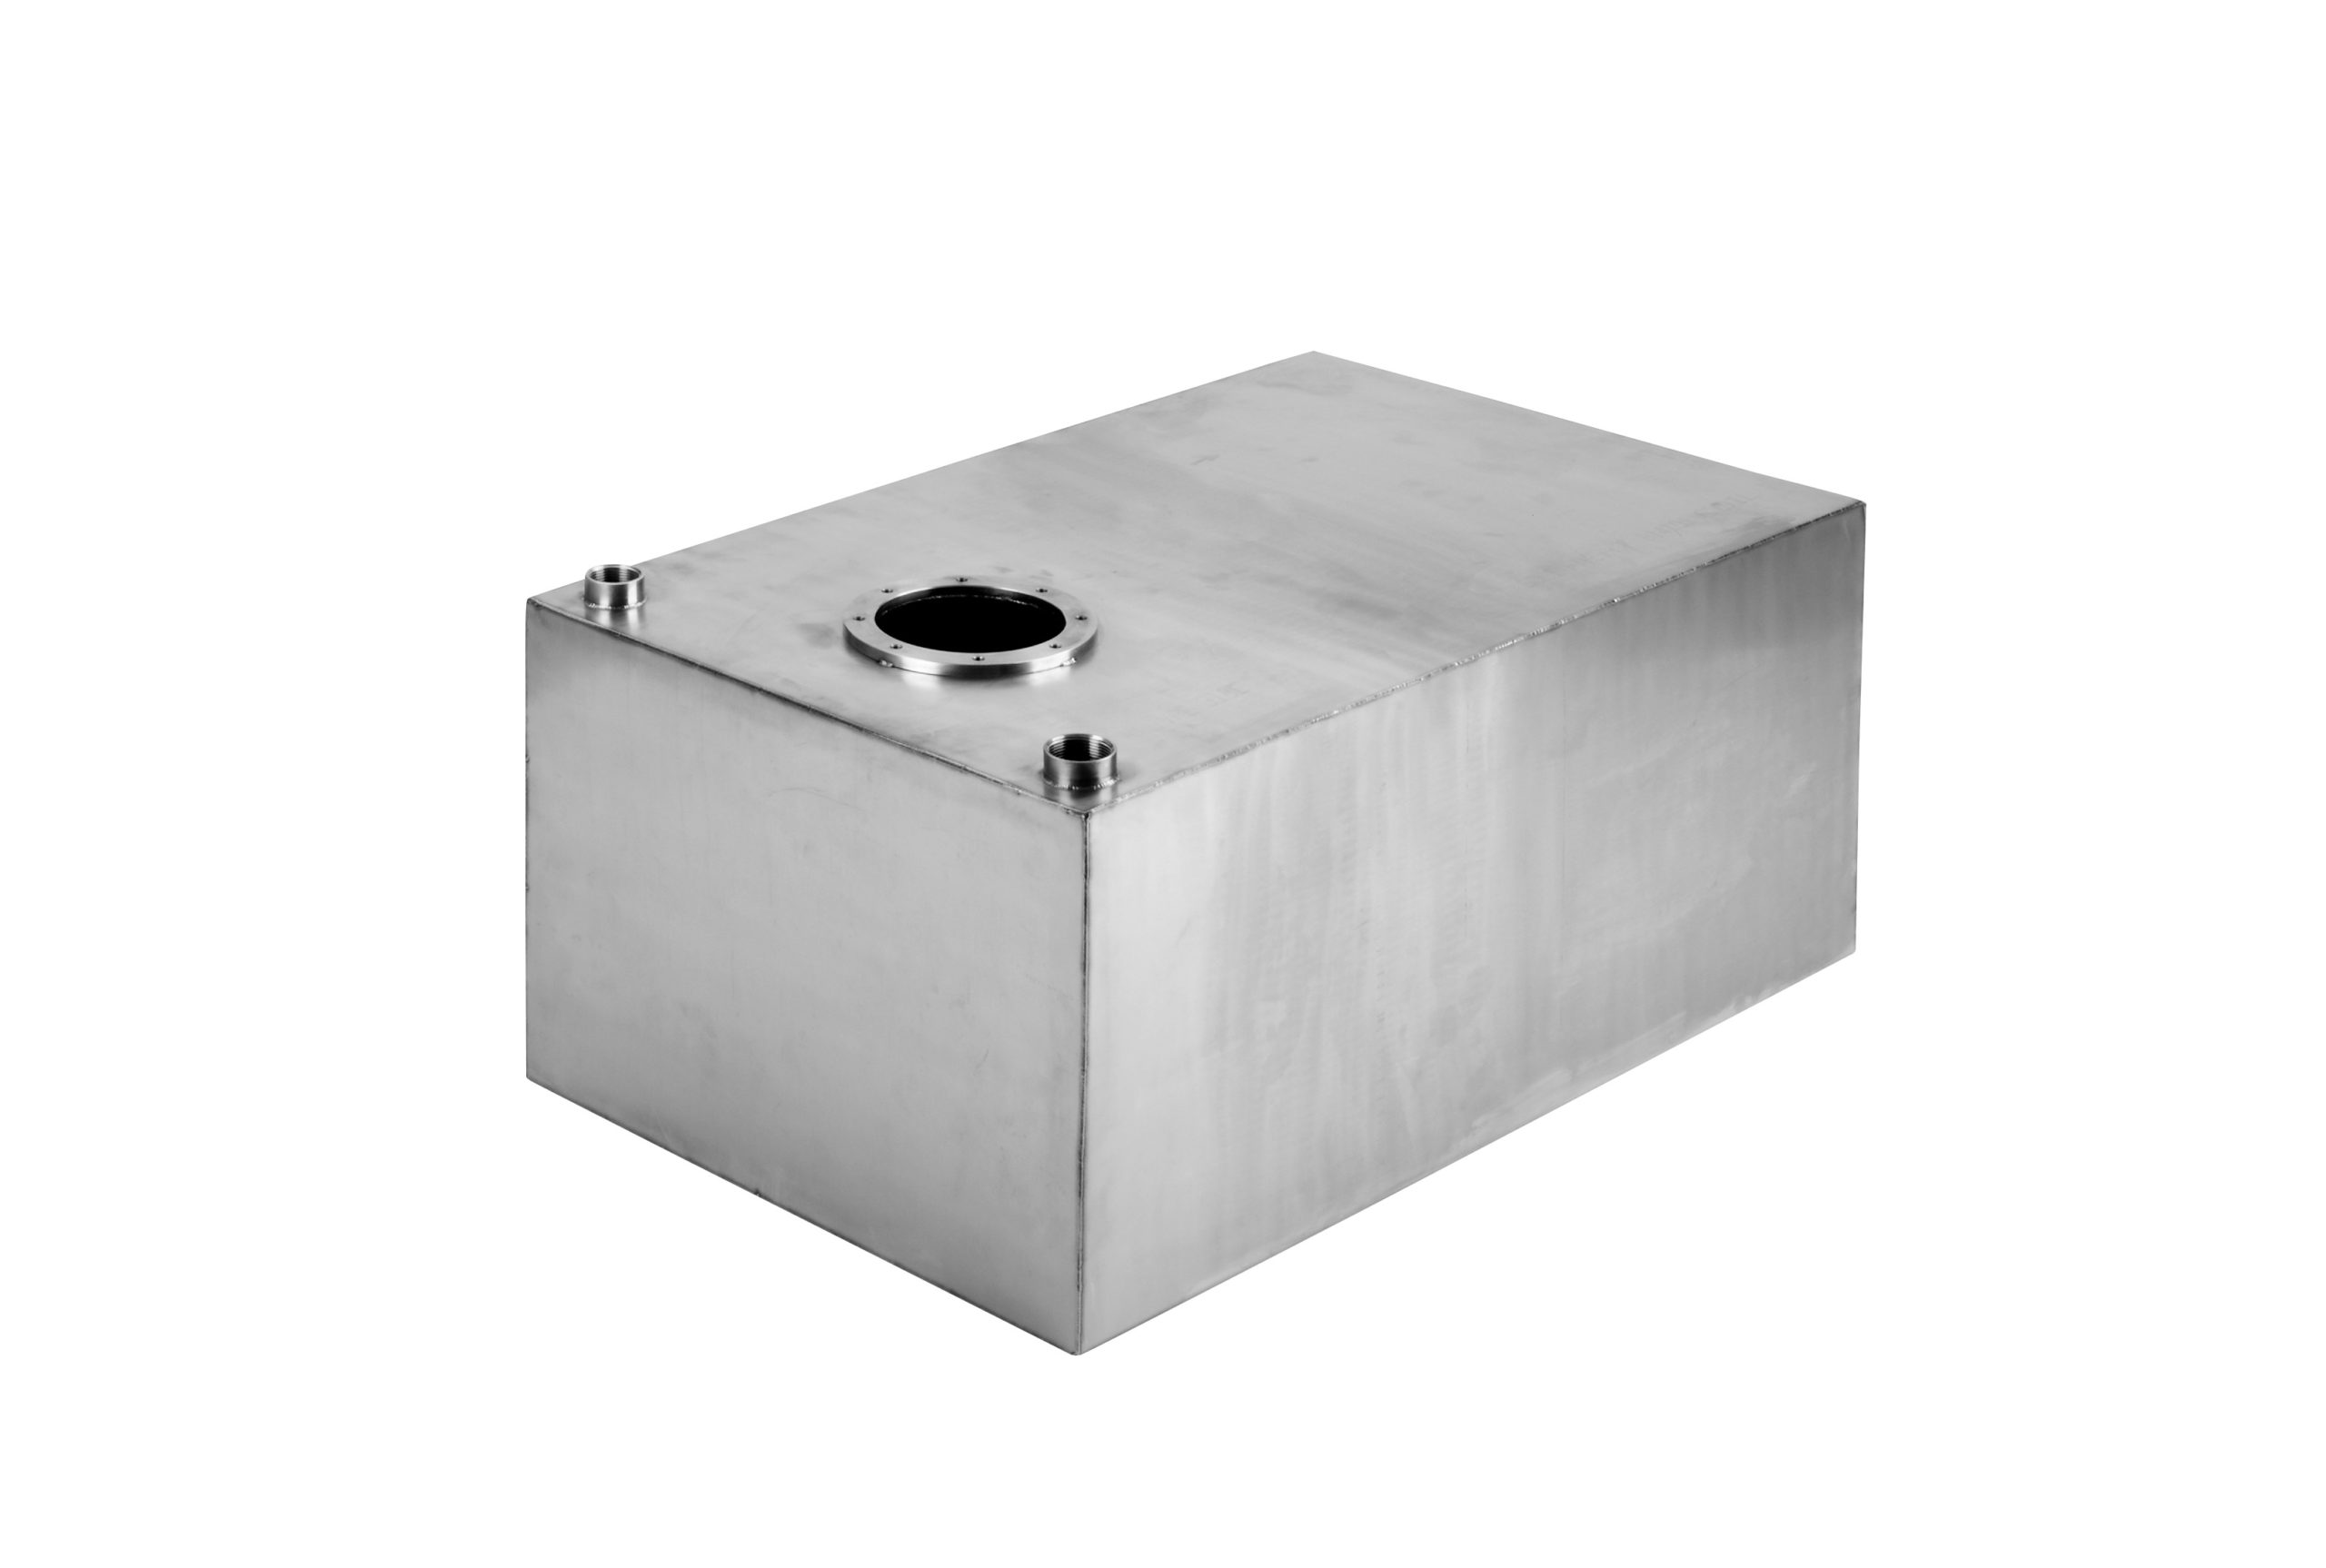 240 Litre Stainless Steel Tank - Drinking Water or Waste Water